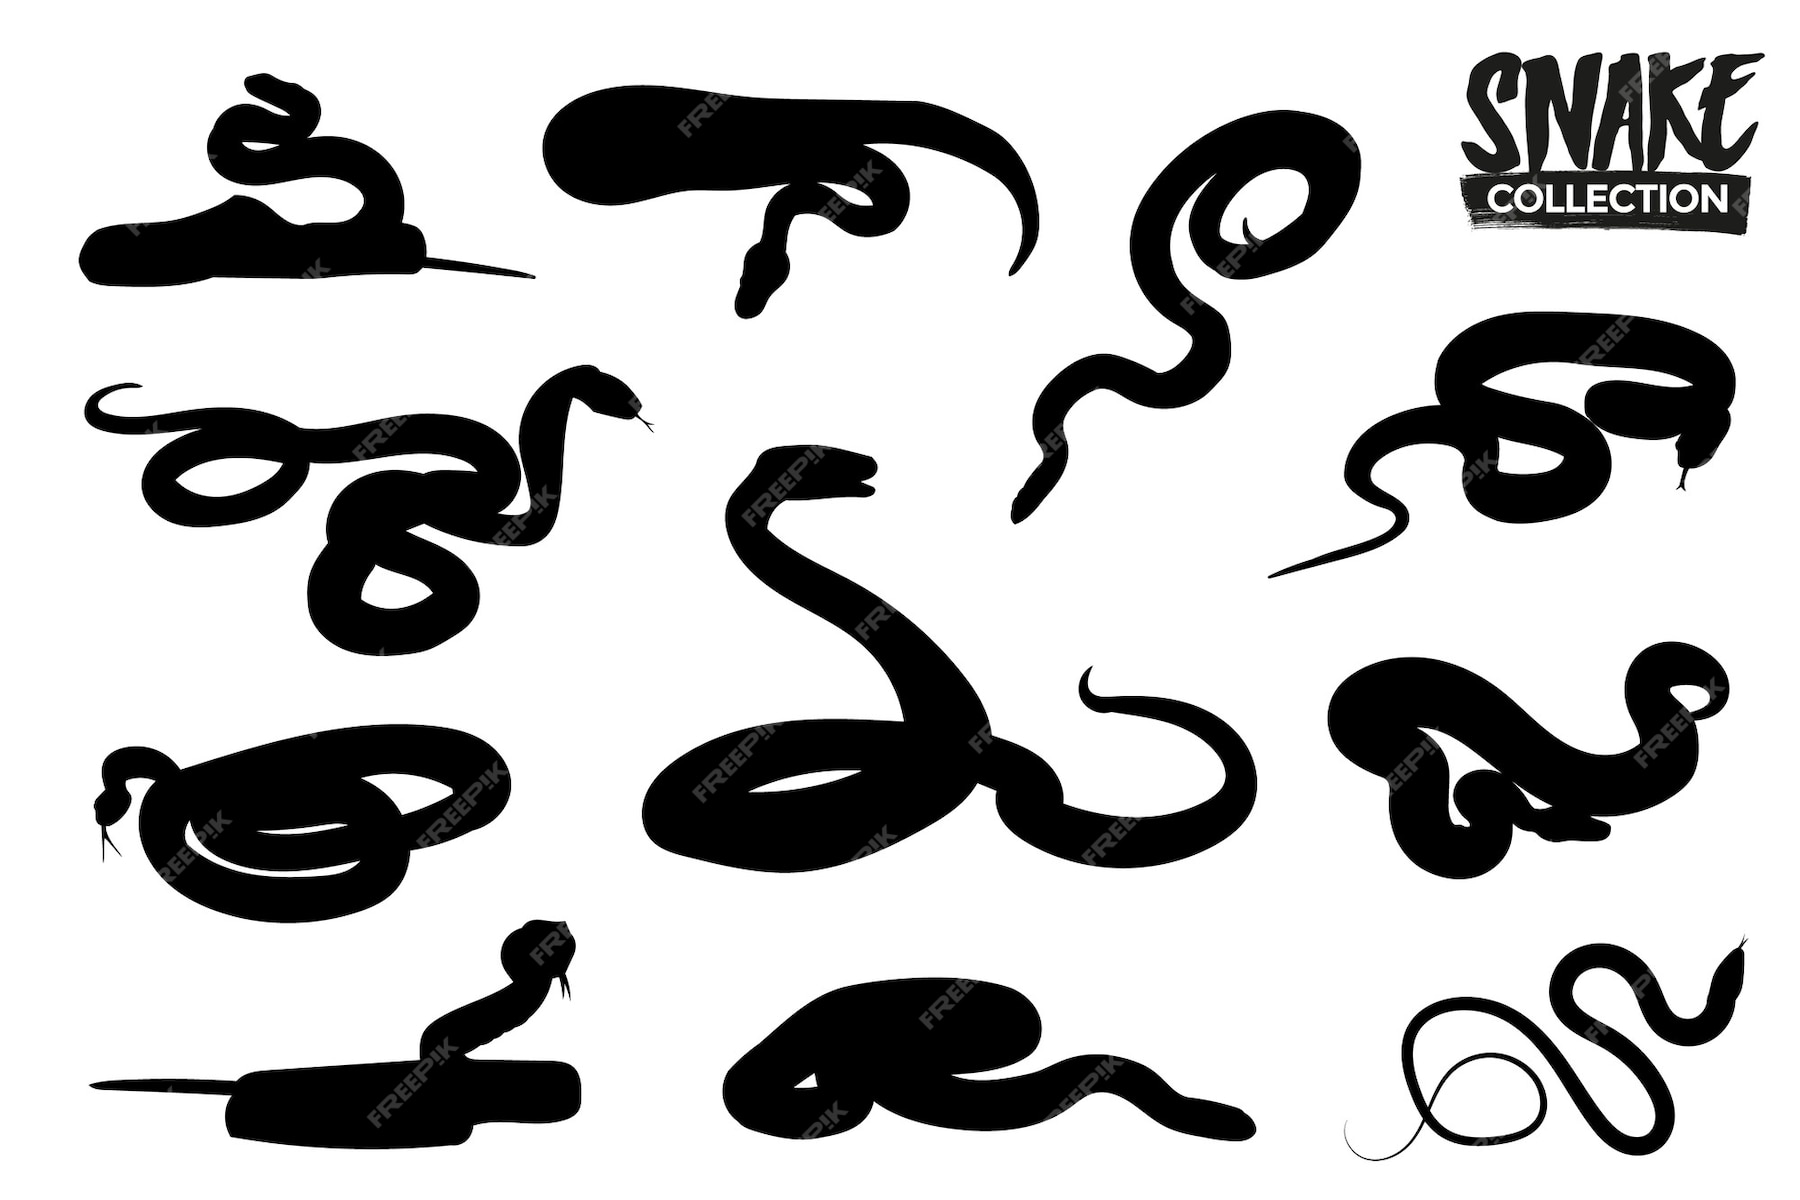 Premium Vector | Isolated snake silhouettes collection. graphic resources.